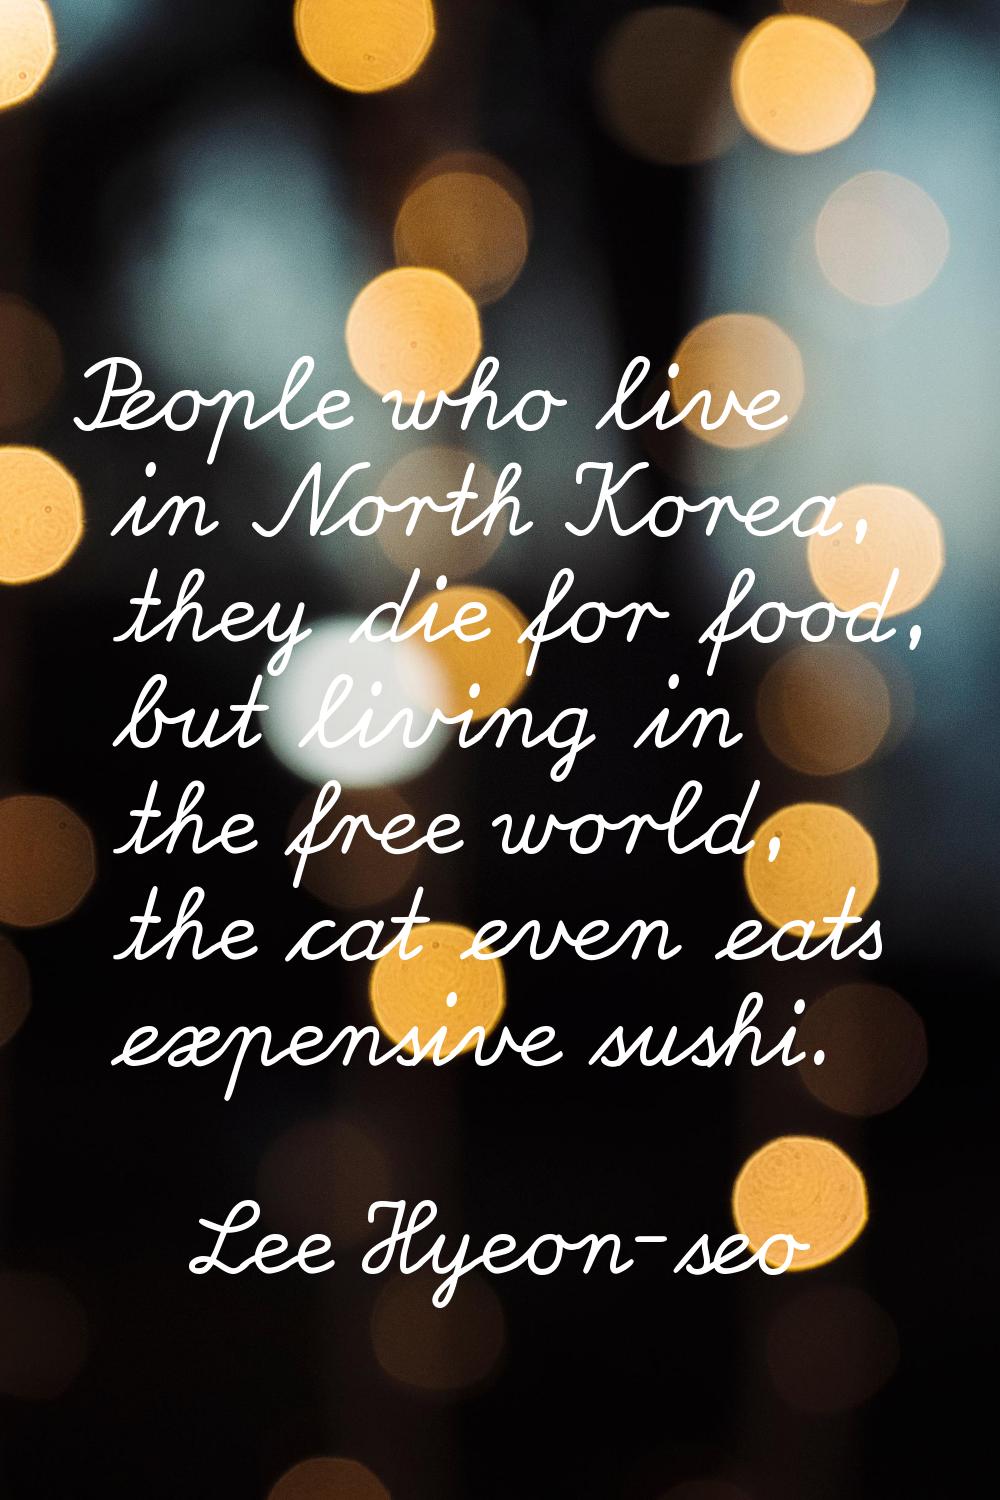 People who live in North Korea, they die for food, but living in the free world, the cat even eats 